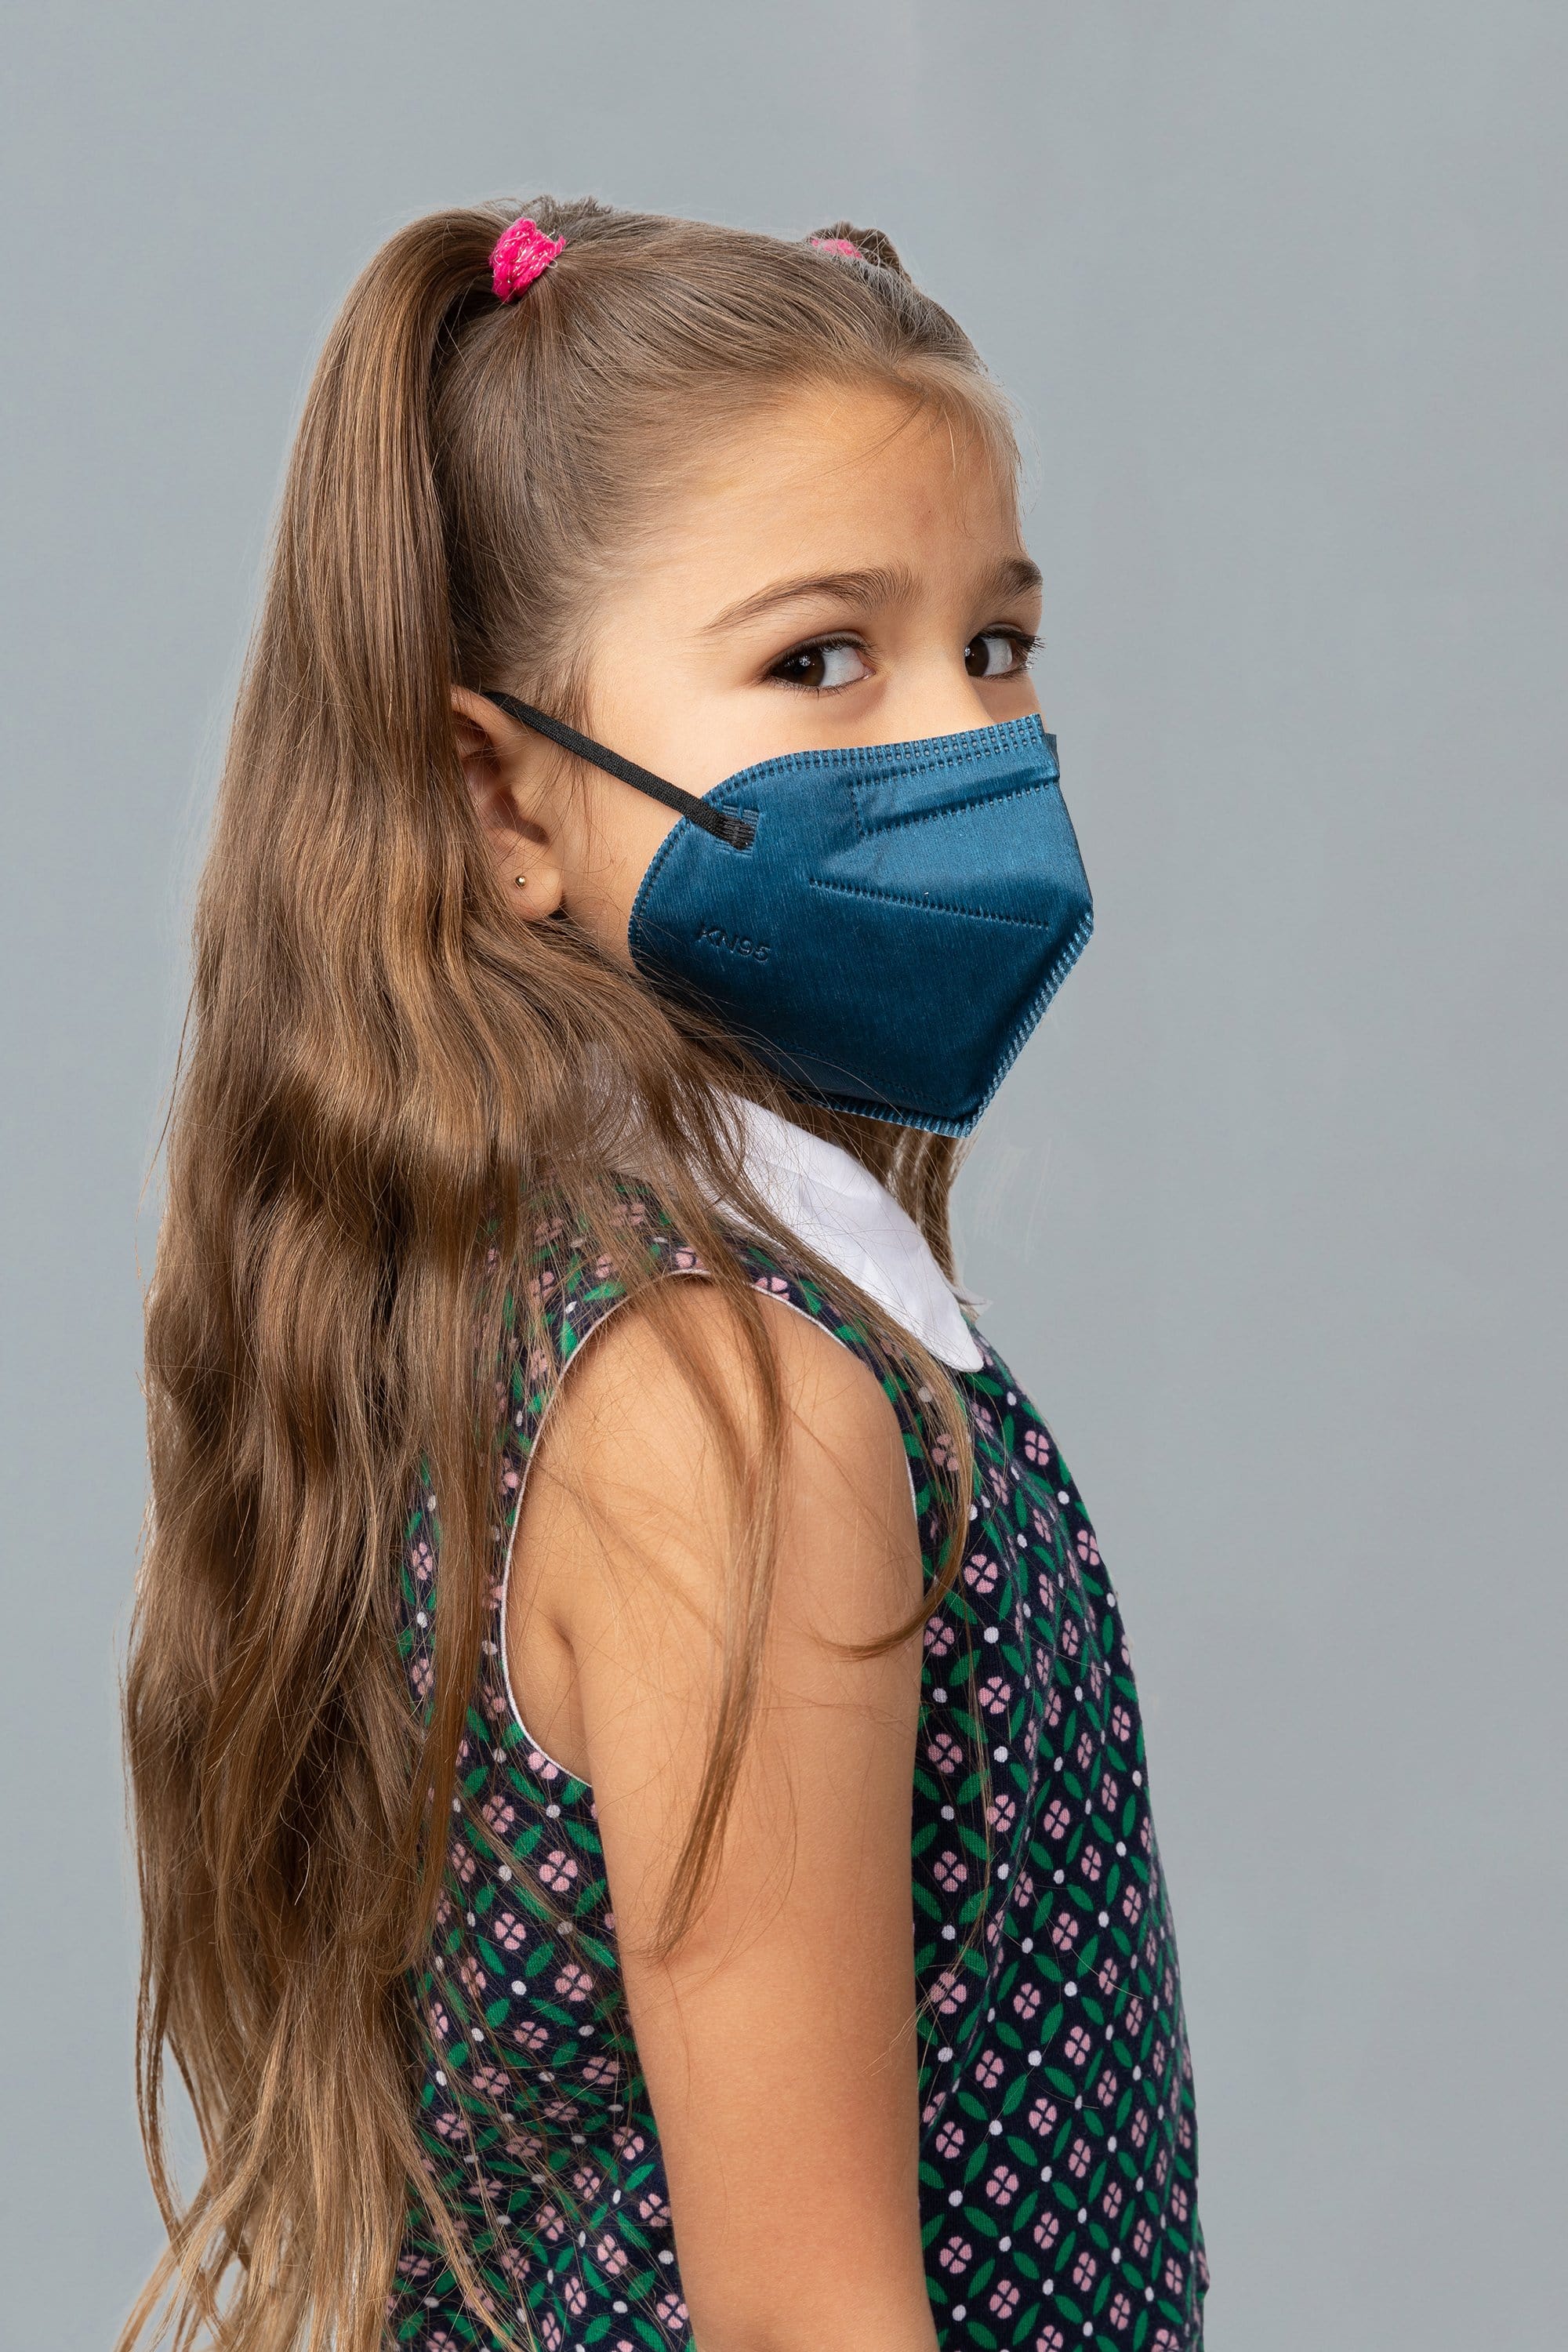 Child wearing stylish kid sized Navy Blue KN95 face mask, with high quality breathable fabric. 